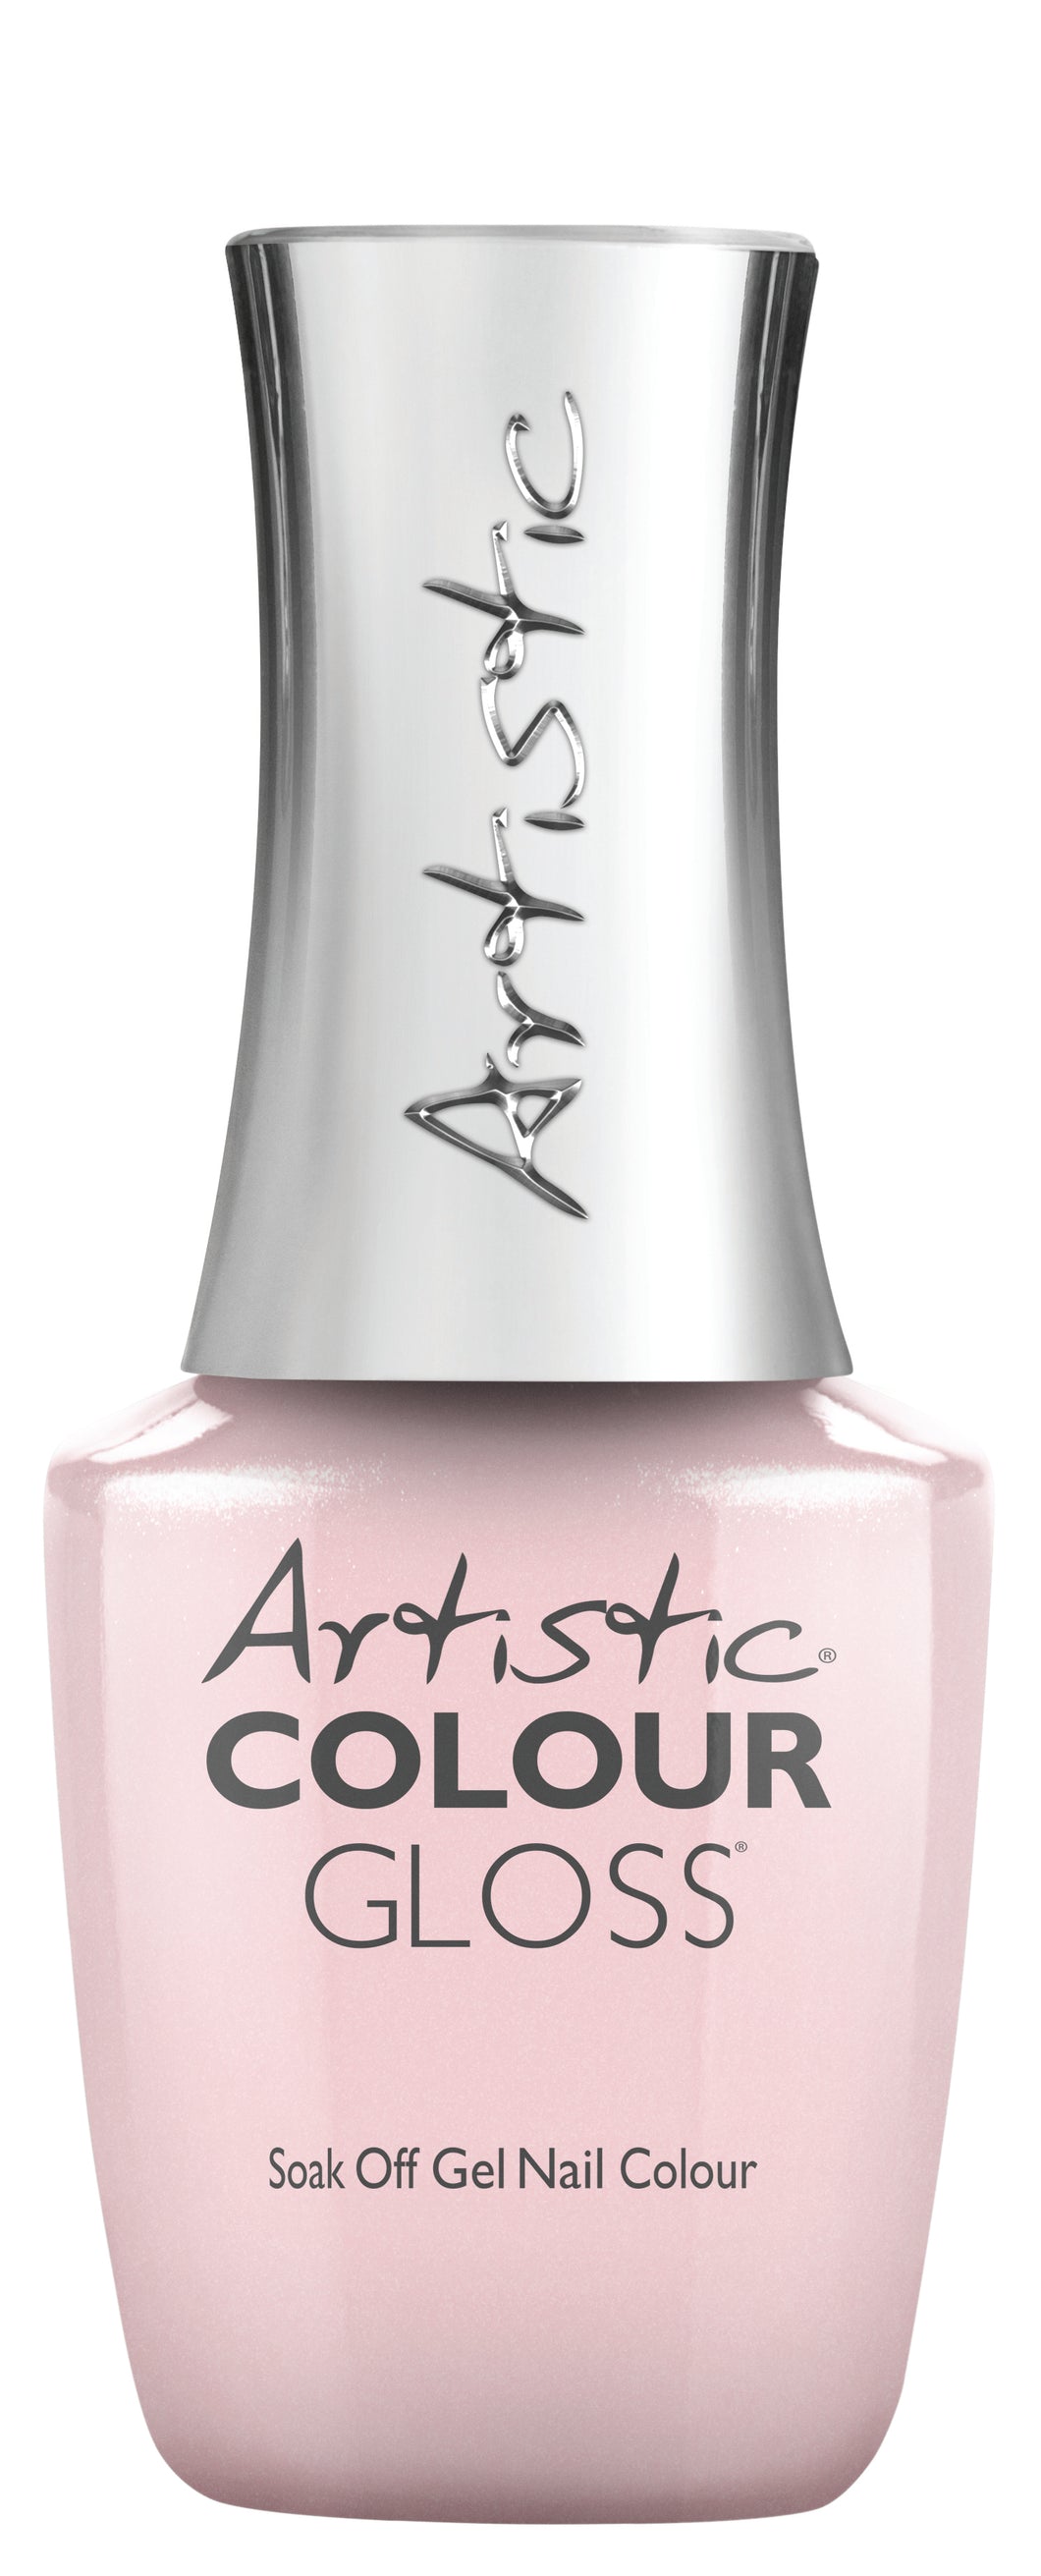 ARTISTIC - DON'T SWEAT THE PINK STUFF - PALE PINK SHIMMER  - Gel 15ml